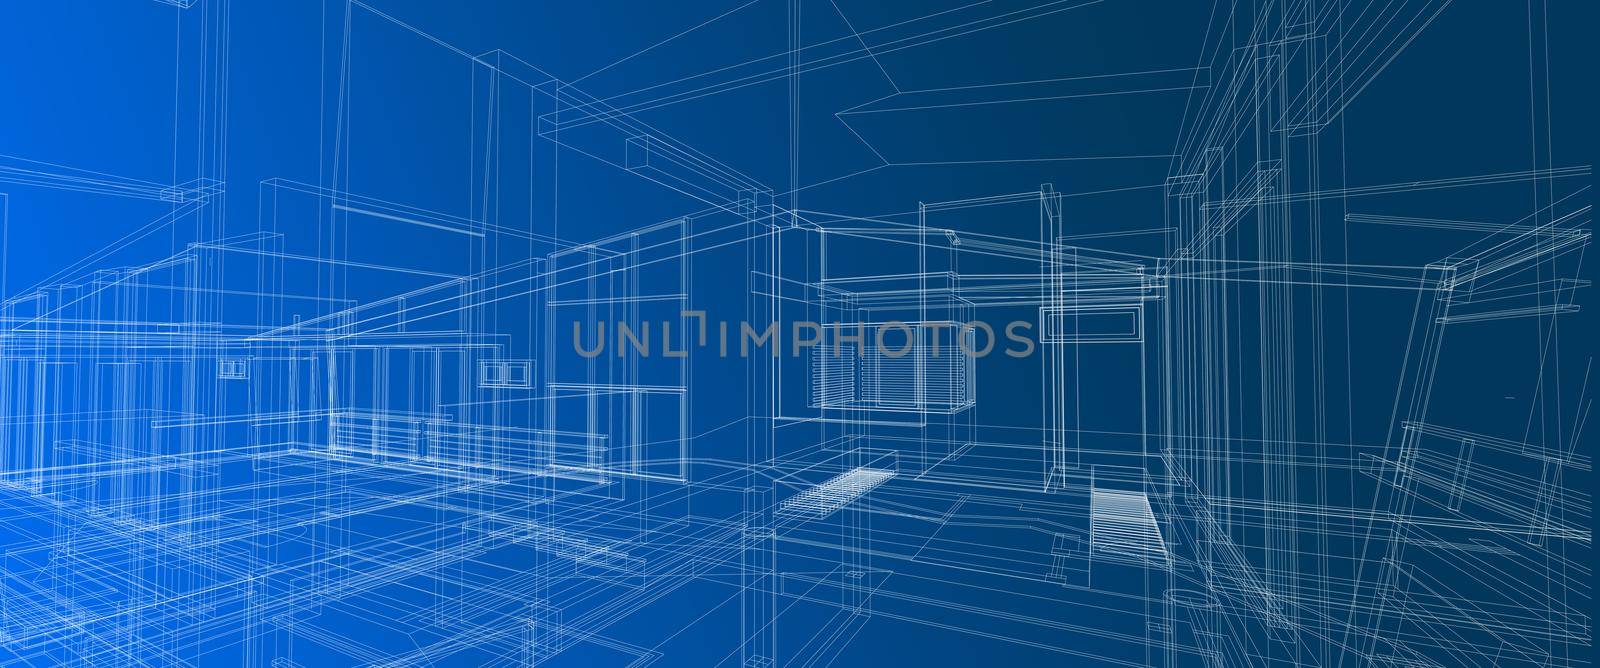 Architecture interior space design concept 3d perspective white wireframe rendering gradient blue background. For abstract background or wallpaper destops architecture theme interior space computer smart technology